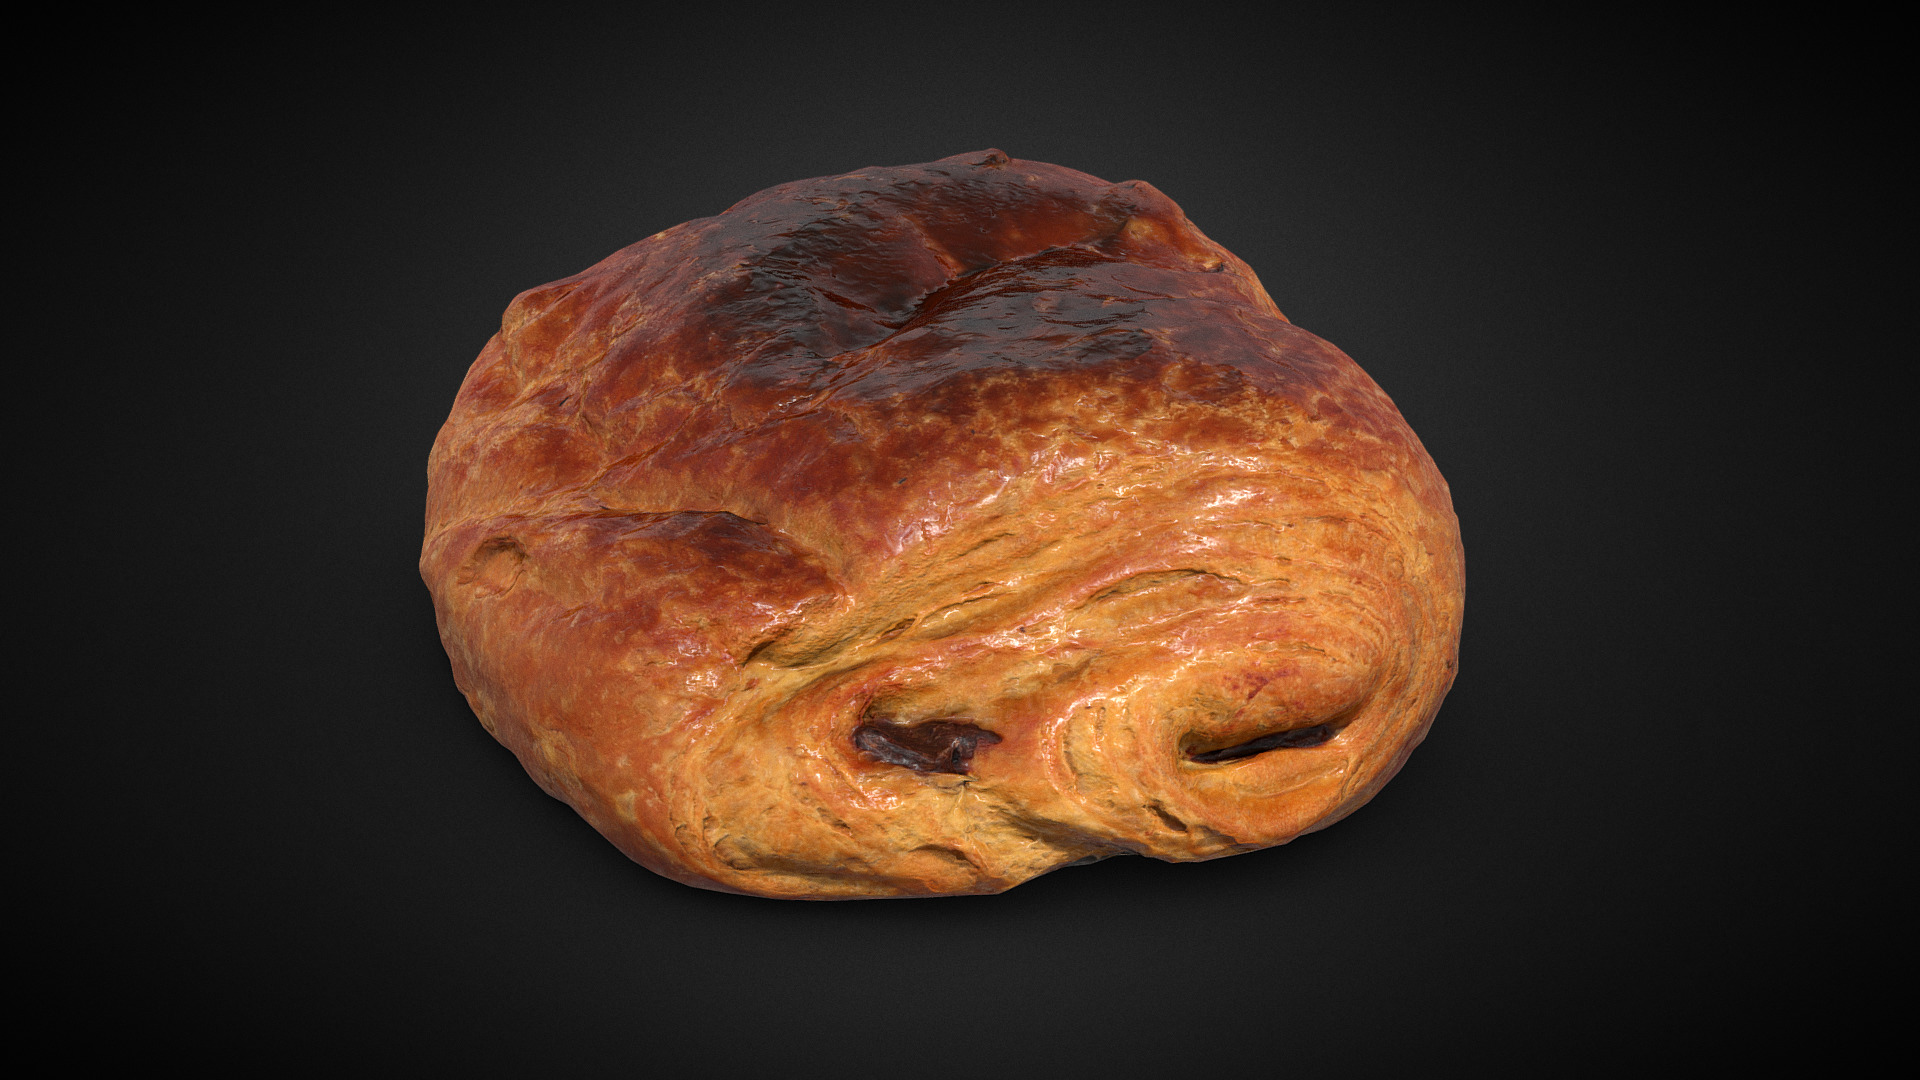 3D model Pain au Chocolat - This is a 3D model of the Pain au Chocolat. The 3D model is about a brown rock with a dark background.